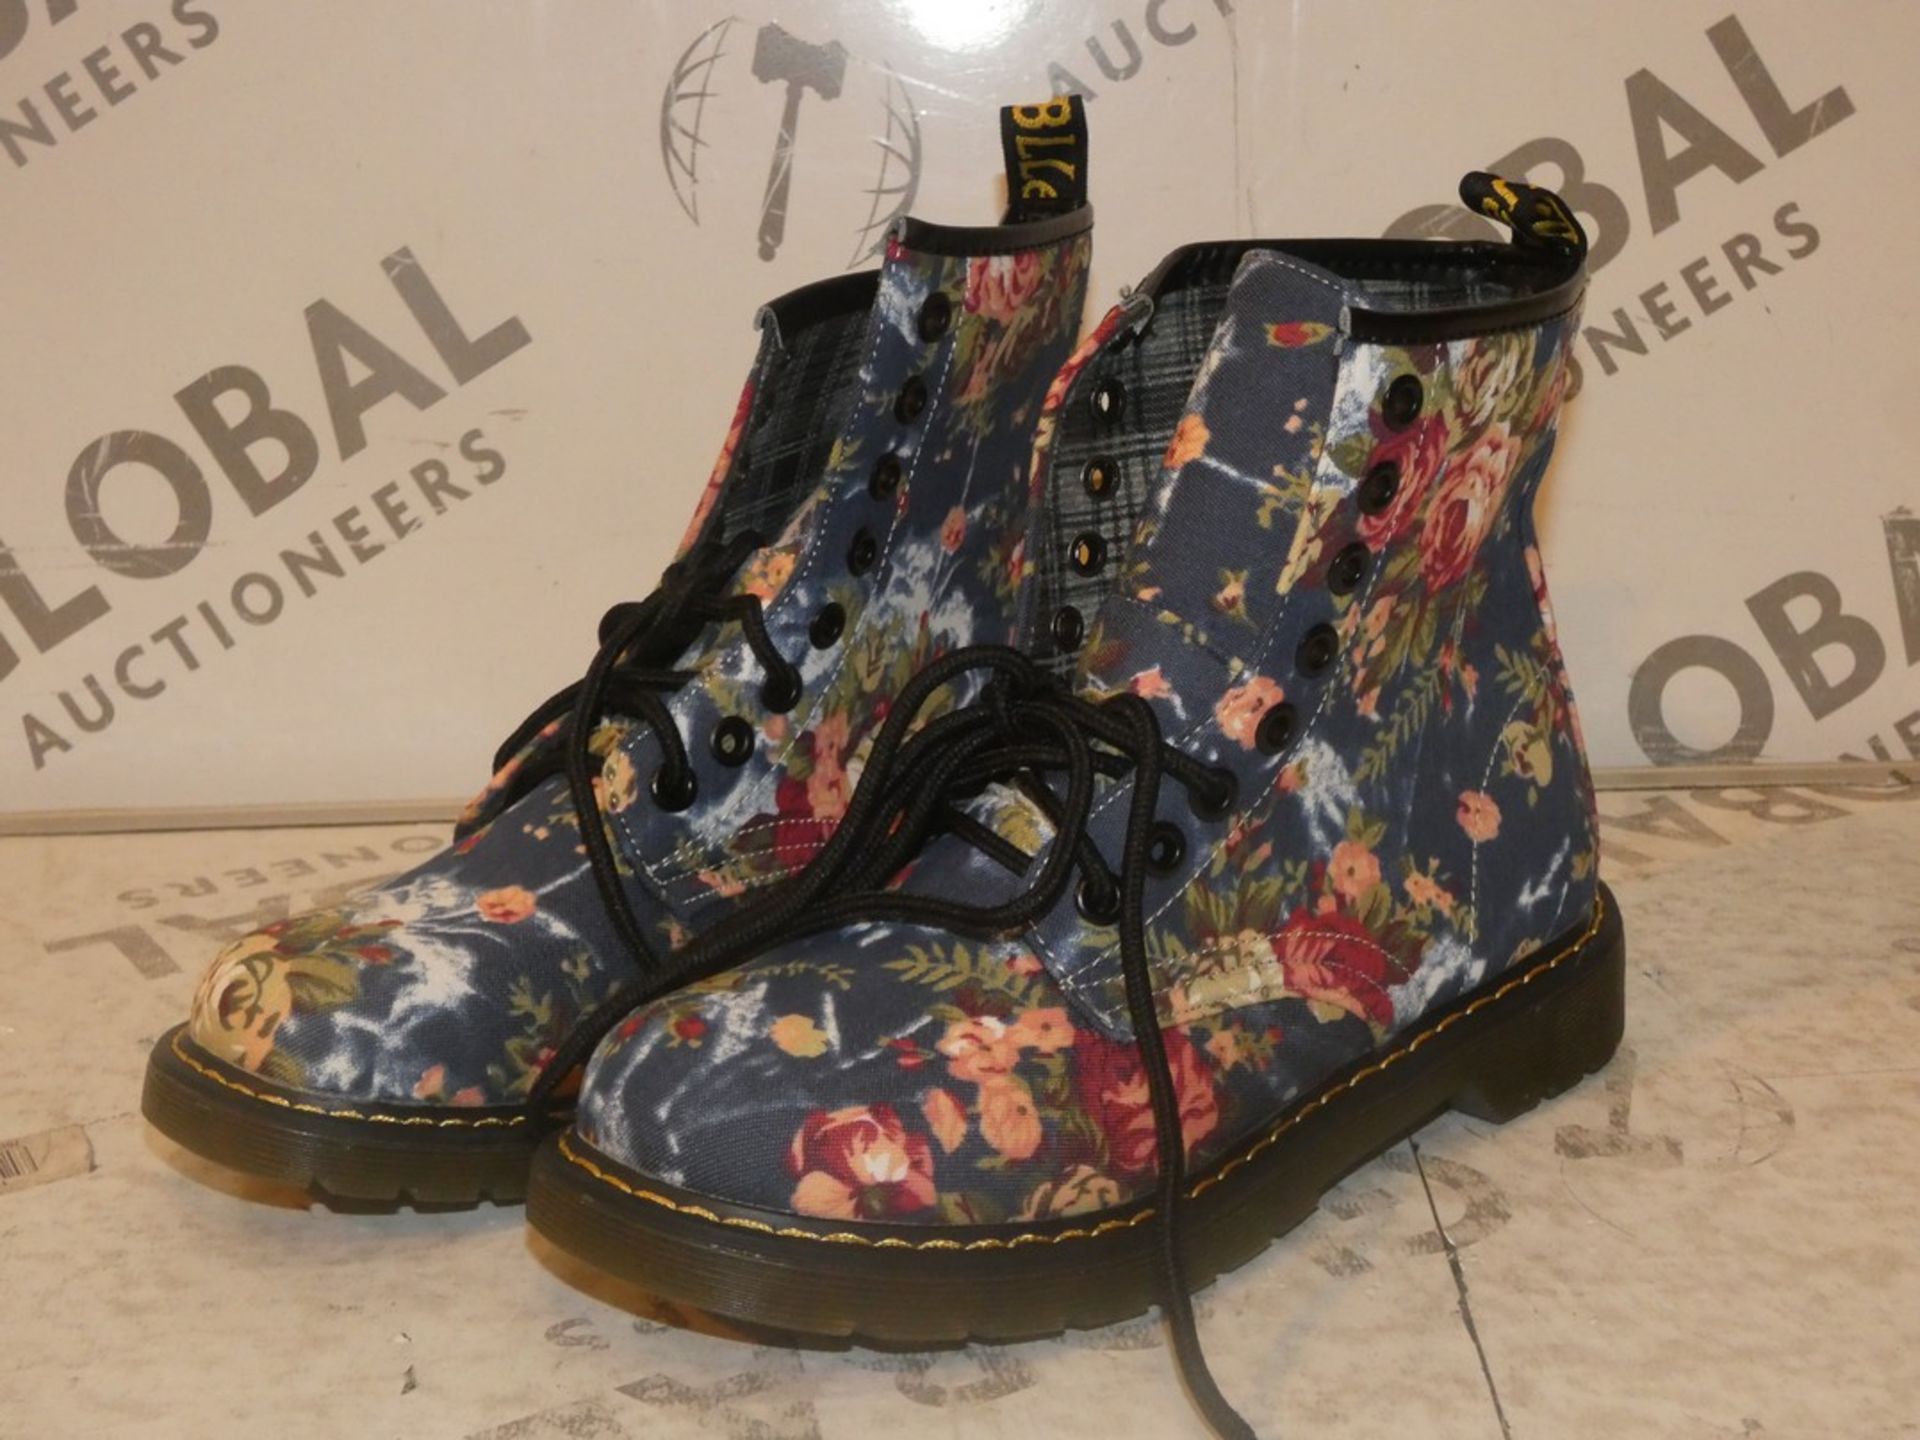 Lot to Contain 2 Pairs of Floral Patterned Doc Martin Type Boots Combined RRP £50